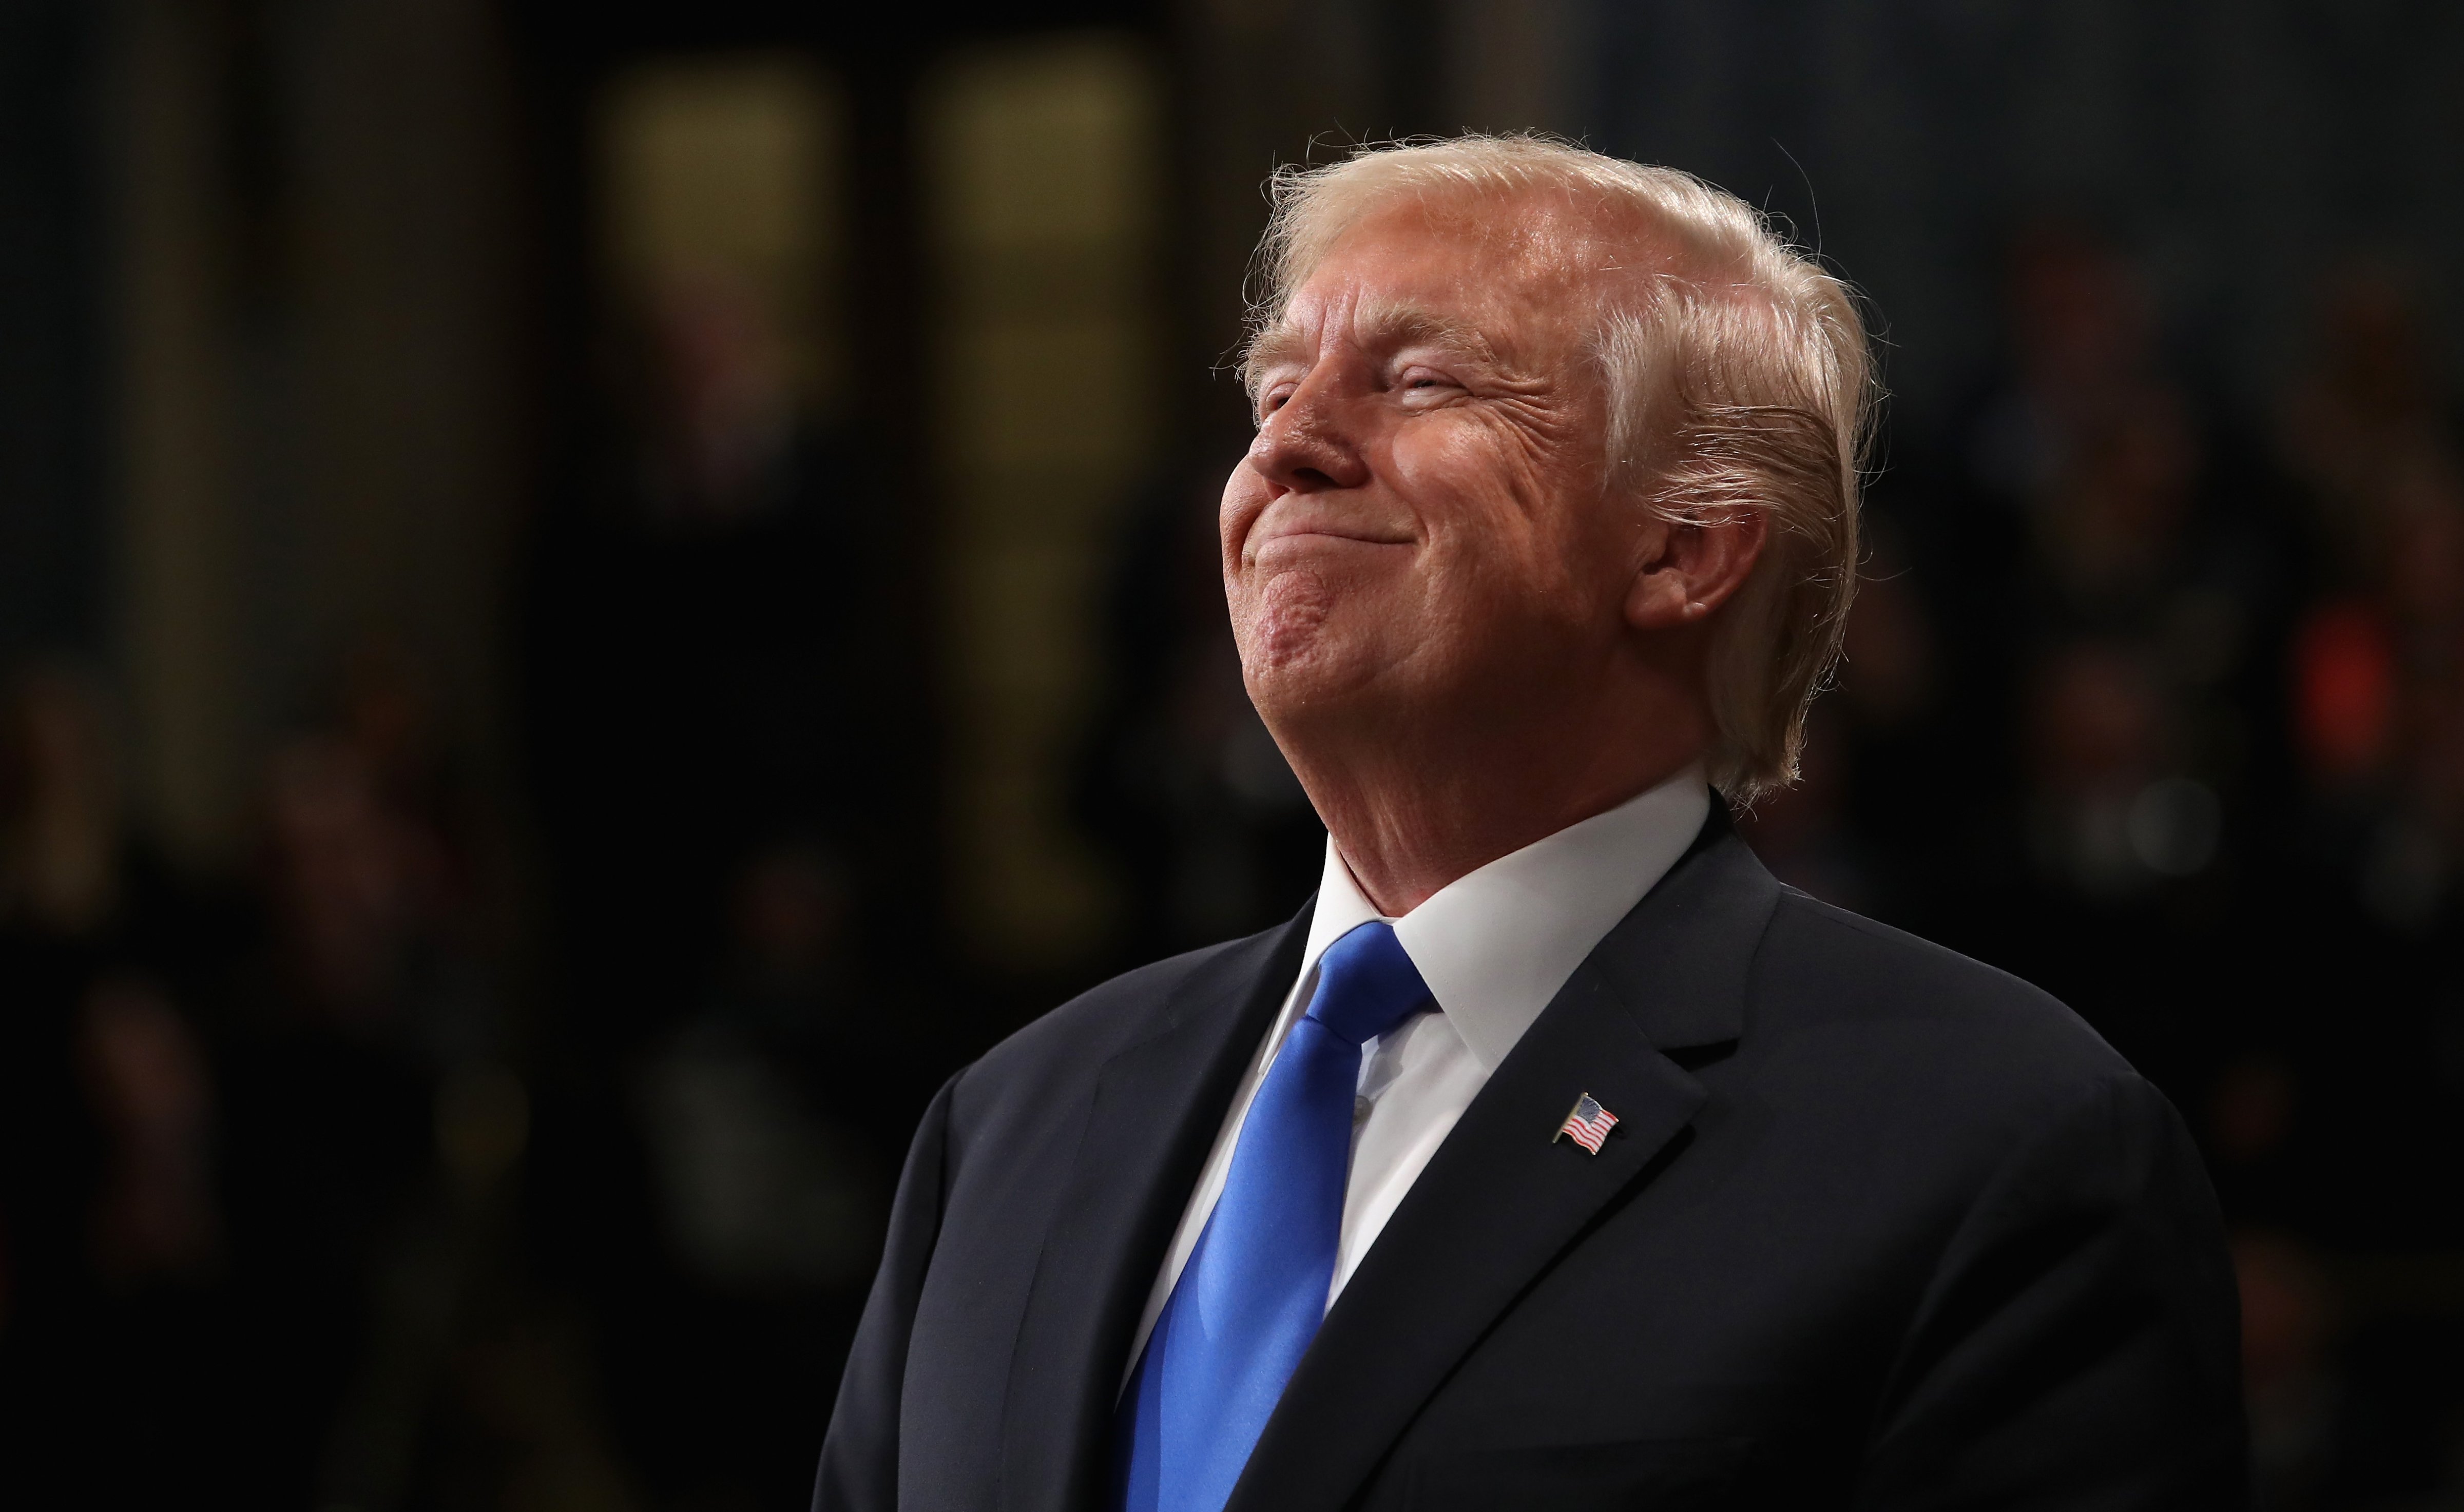 President Donald Trump smiles while delivering the State of the Union address. (Bloomberg—Bloomberg via Getty Images)